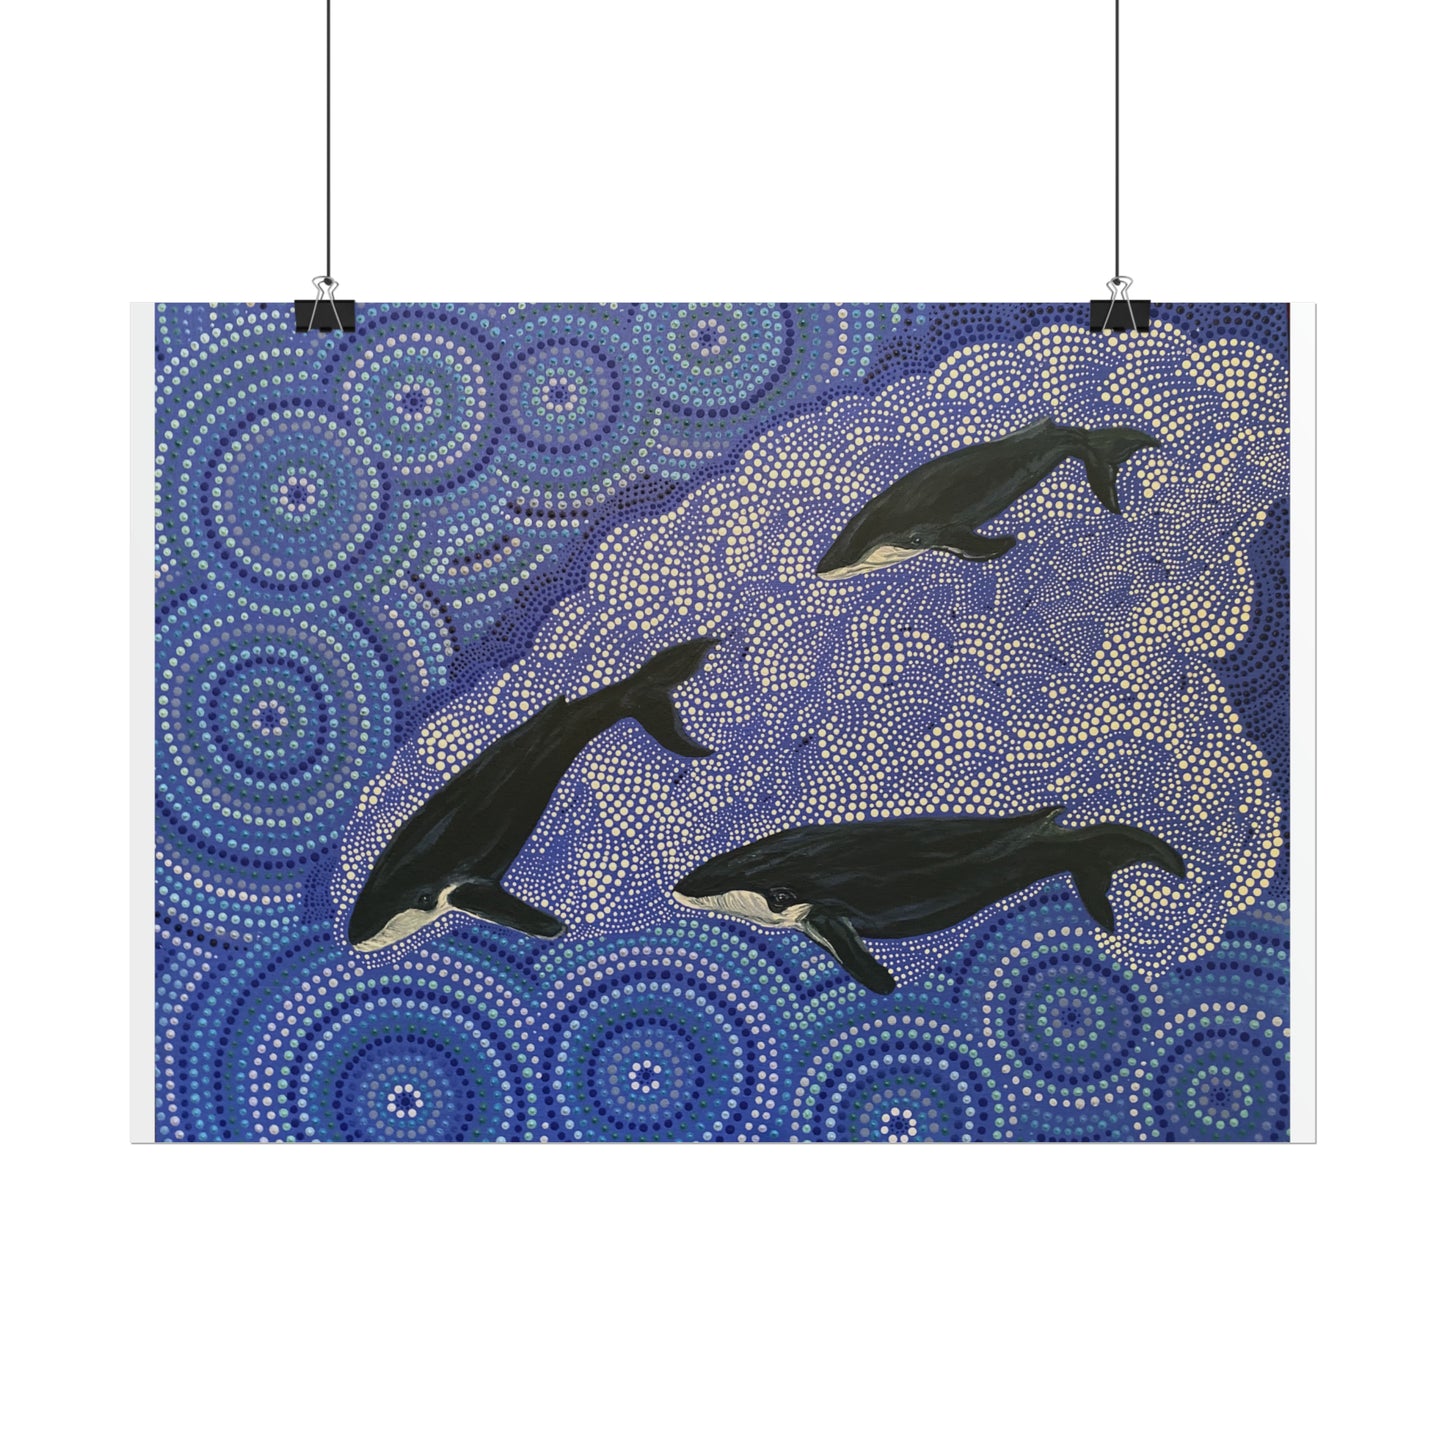 Three Whales at Long Reef Artist Kim's Dot Paintings Rolled Poster